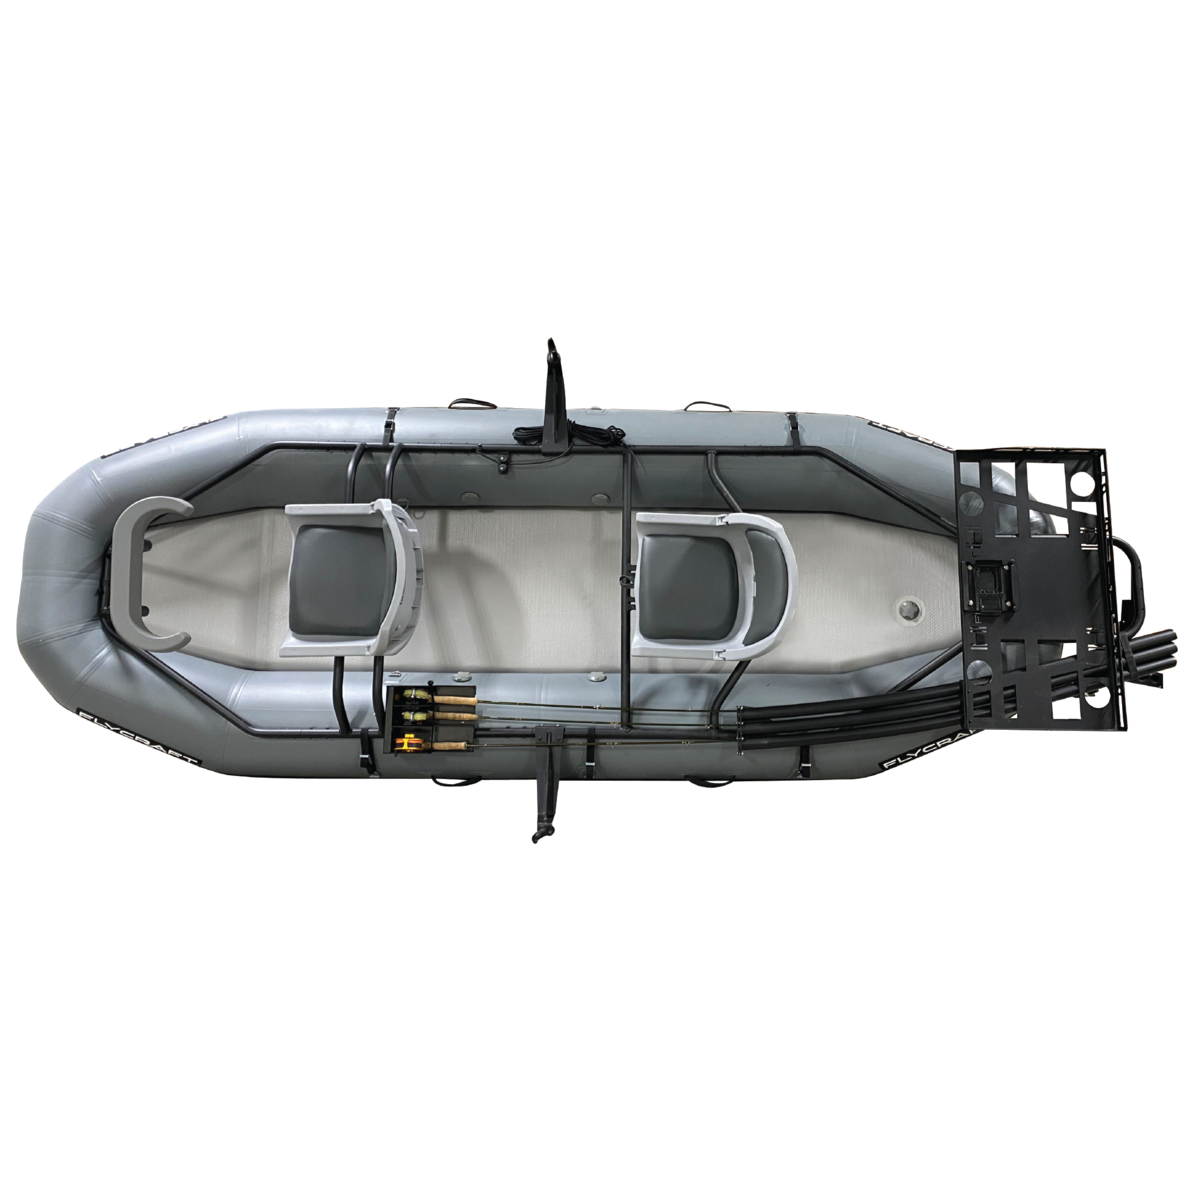 The Flycraft Is the Fishing Boat You Can Fit in Your Trunk